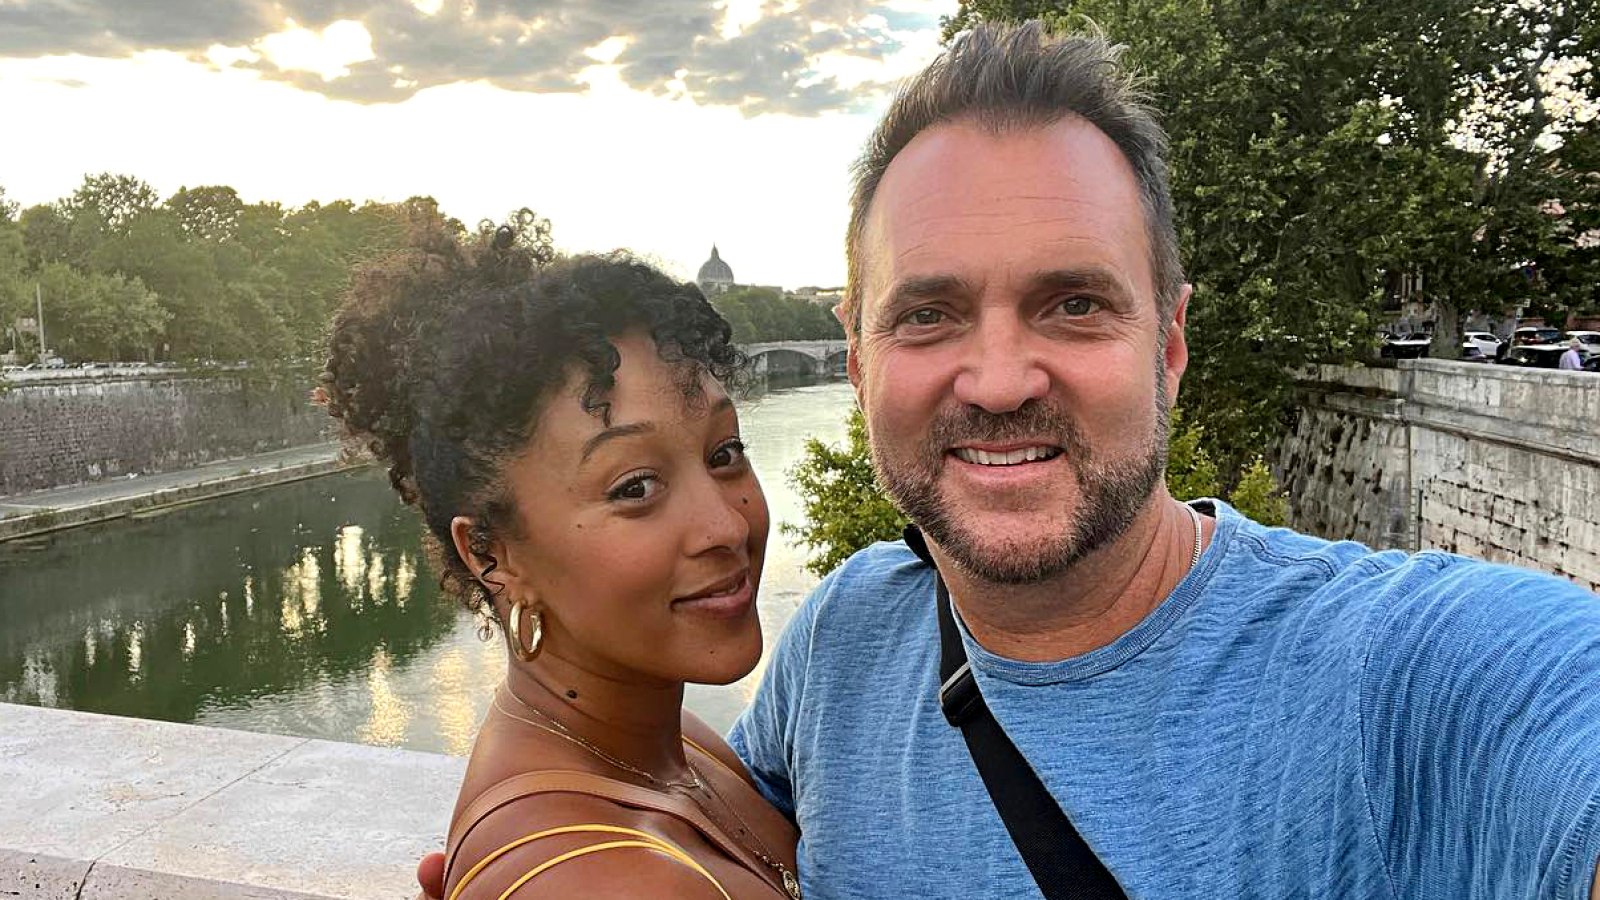 Tamera Mowry and Husband Adam Housley Have ‘Sex Goals’ List: It's Our Secret to 'Staying Happily Married'